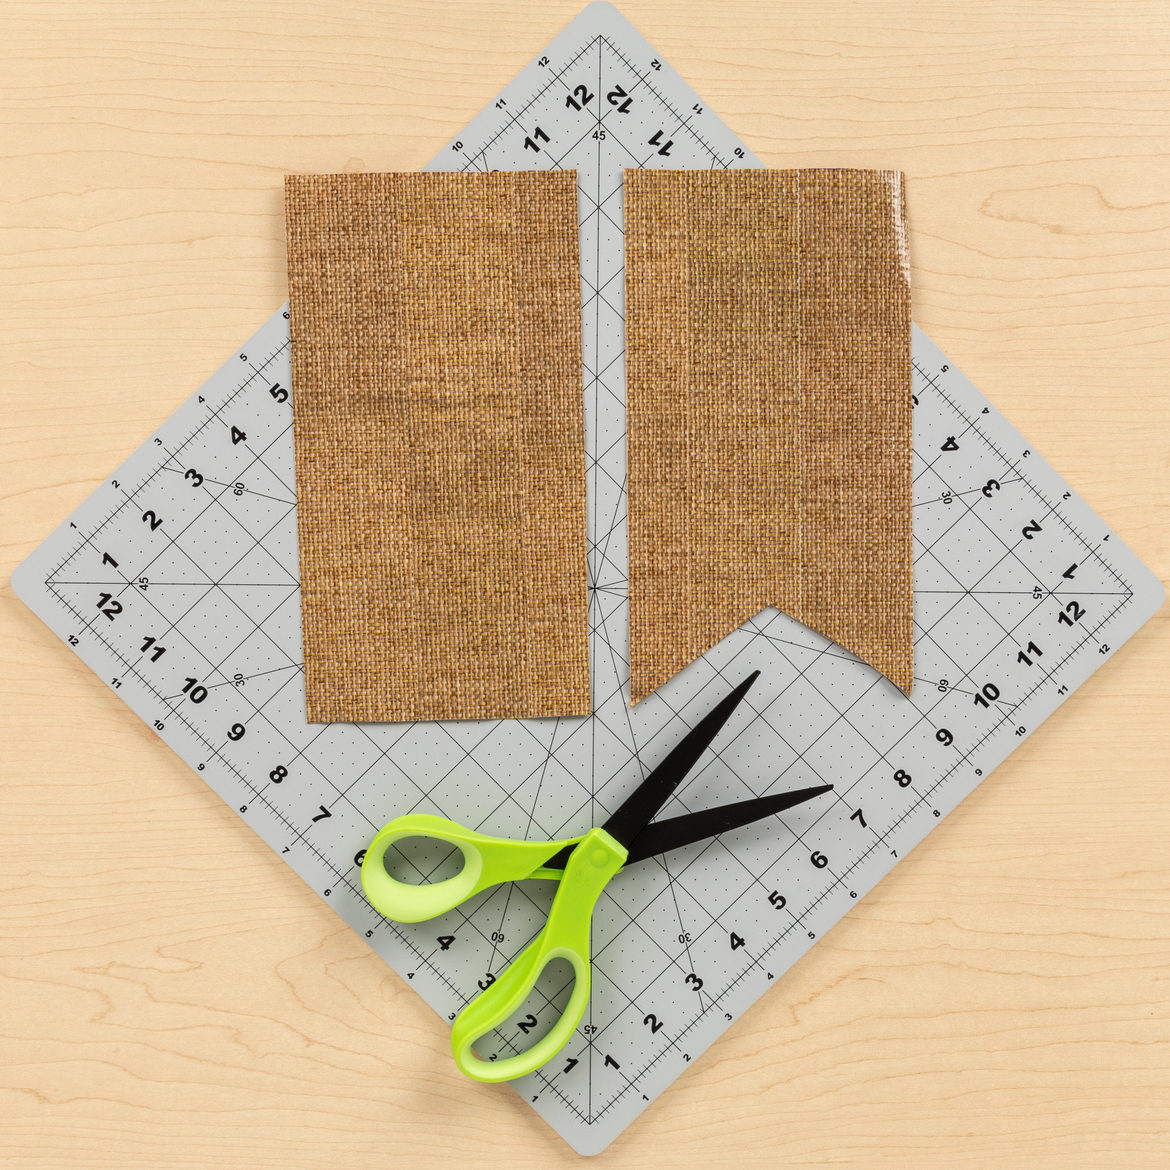 Burlap rectangles with a V shape cut out at the bottom to create a banner shape